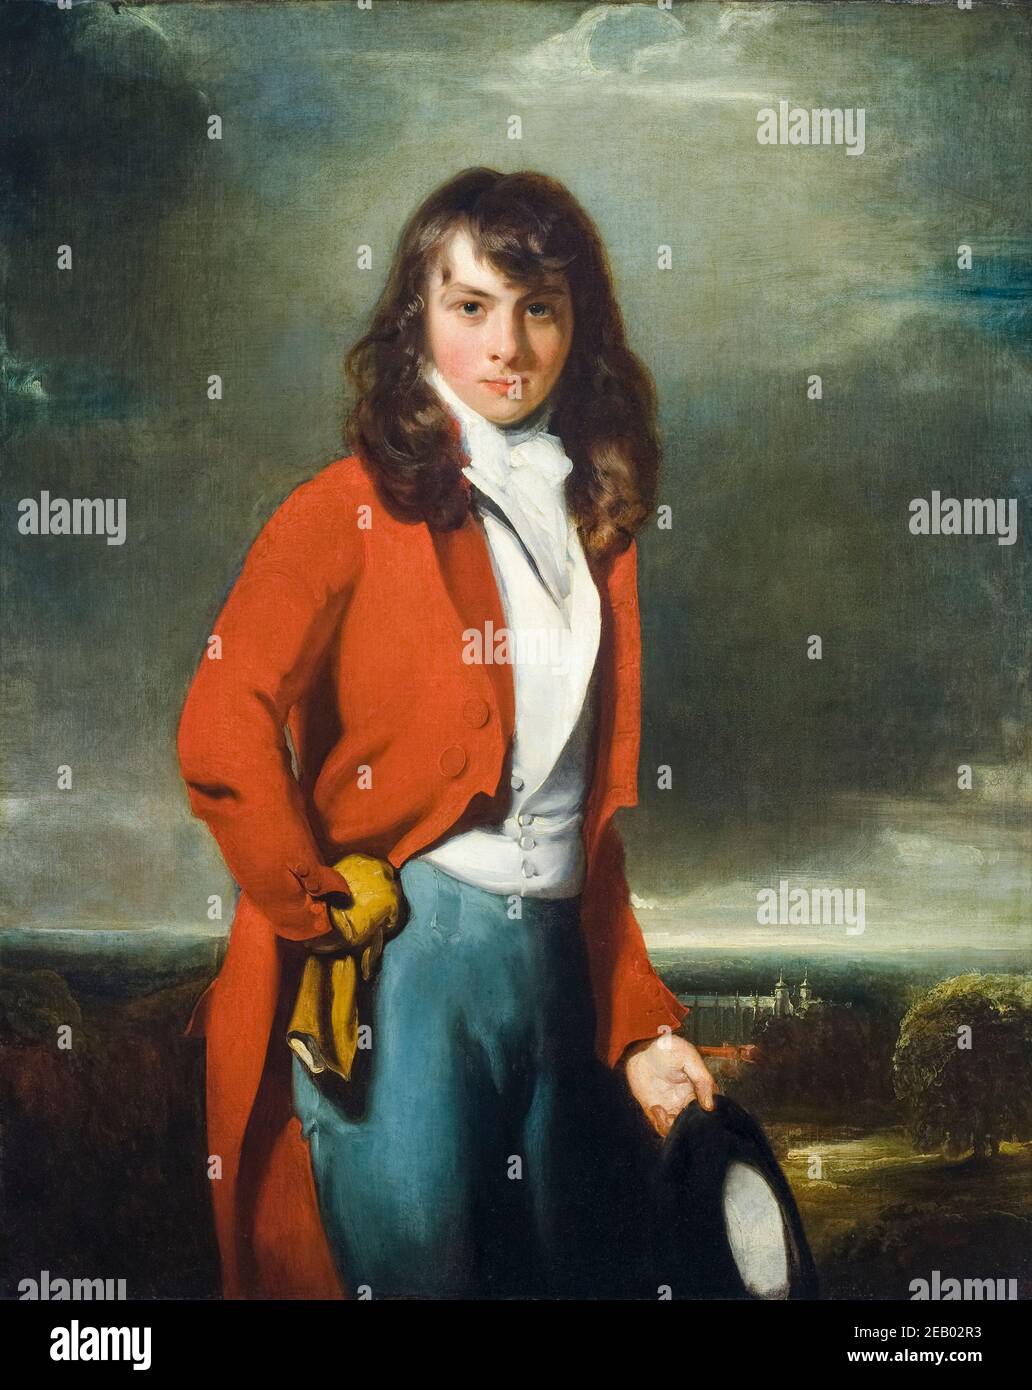 Arthur Atherley (1772-1844), as an Etonian, later English MP and reformer, portrait painting by Sir Thomas Lawrence, circa 1791 Stock Photo